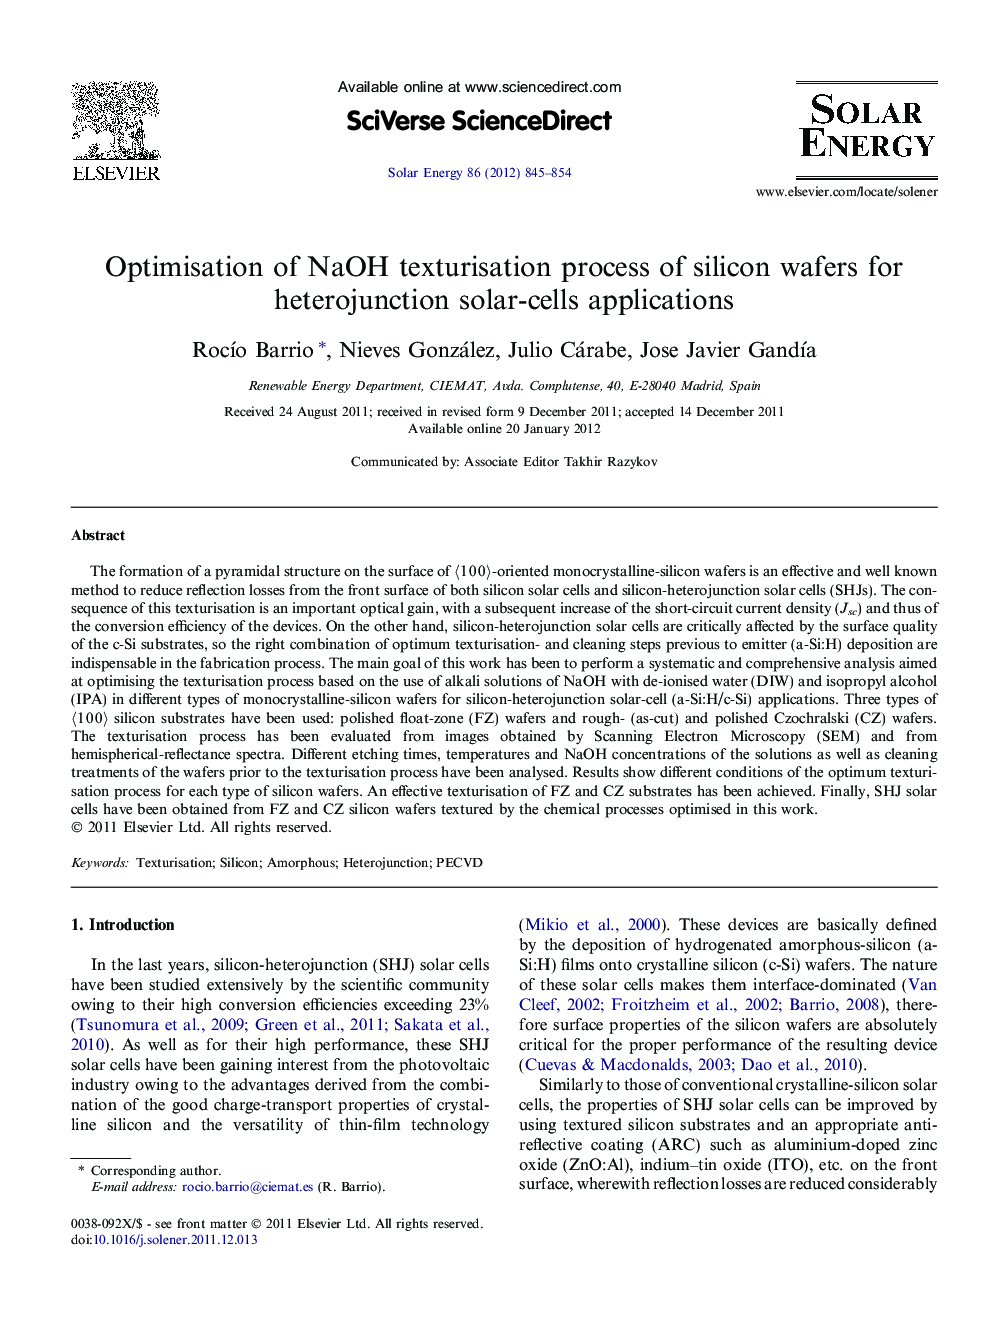 Optimisation of NaOH texturisation process of silicon wafers for heterojunction solar-cells applications